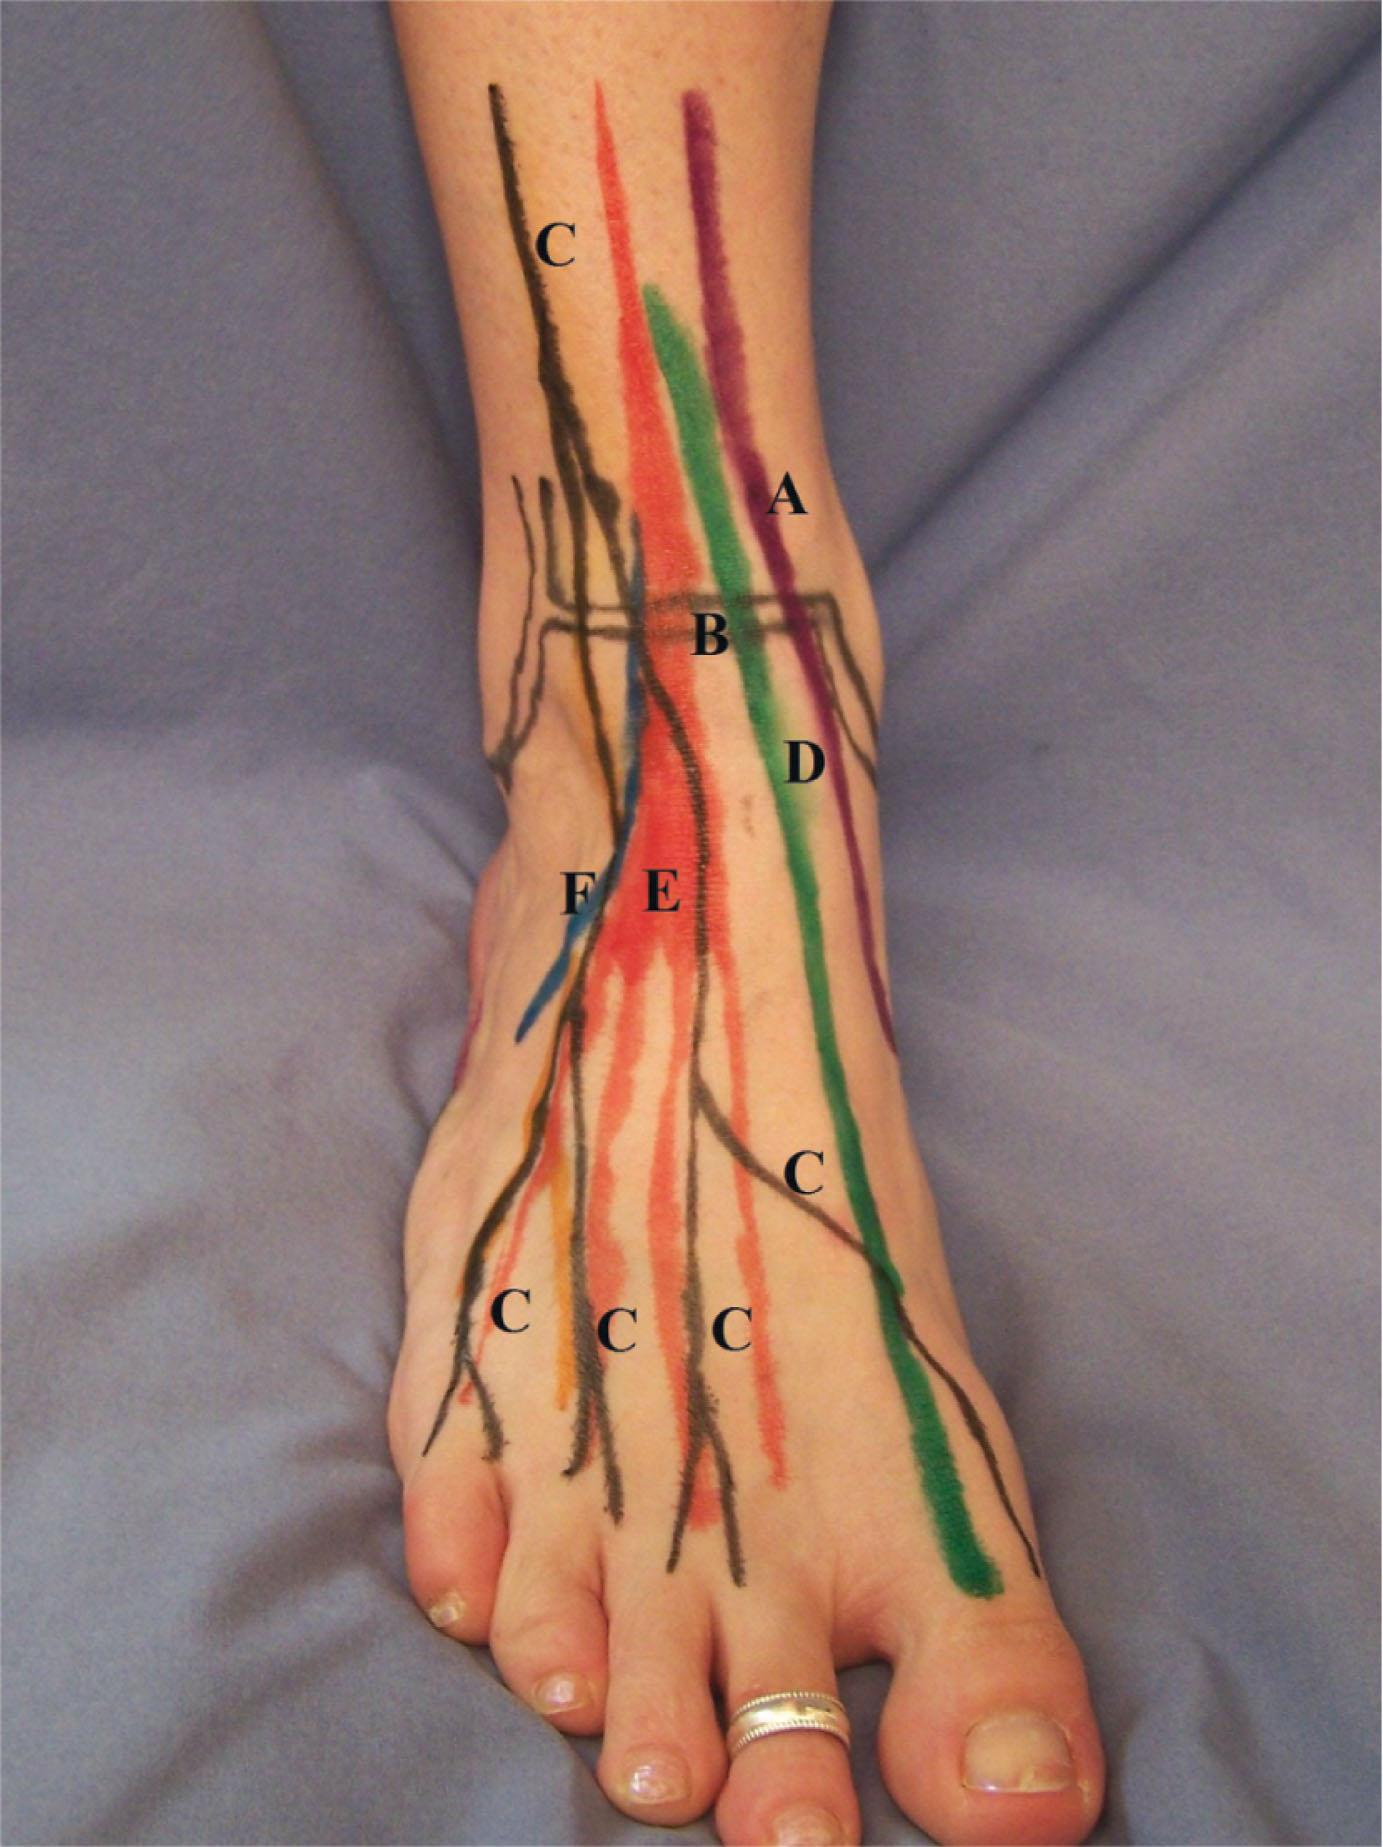 Fig. 2-10, Anterior ankle. A , Anterior tibialis tendon; B , anterior ankle joint; C , branches of the superficial peroneal nerve; D , extensor hallucis longus; E , extensor digitorum longus; F , peroneus tertius.